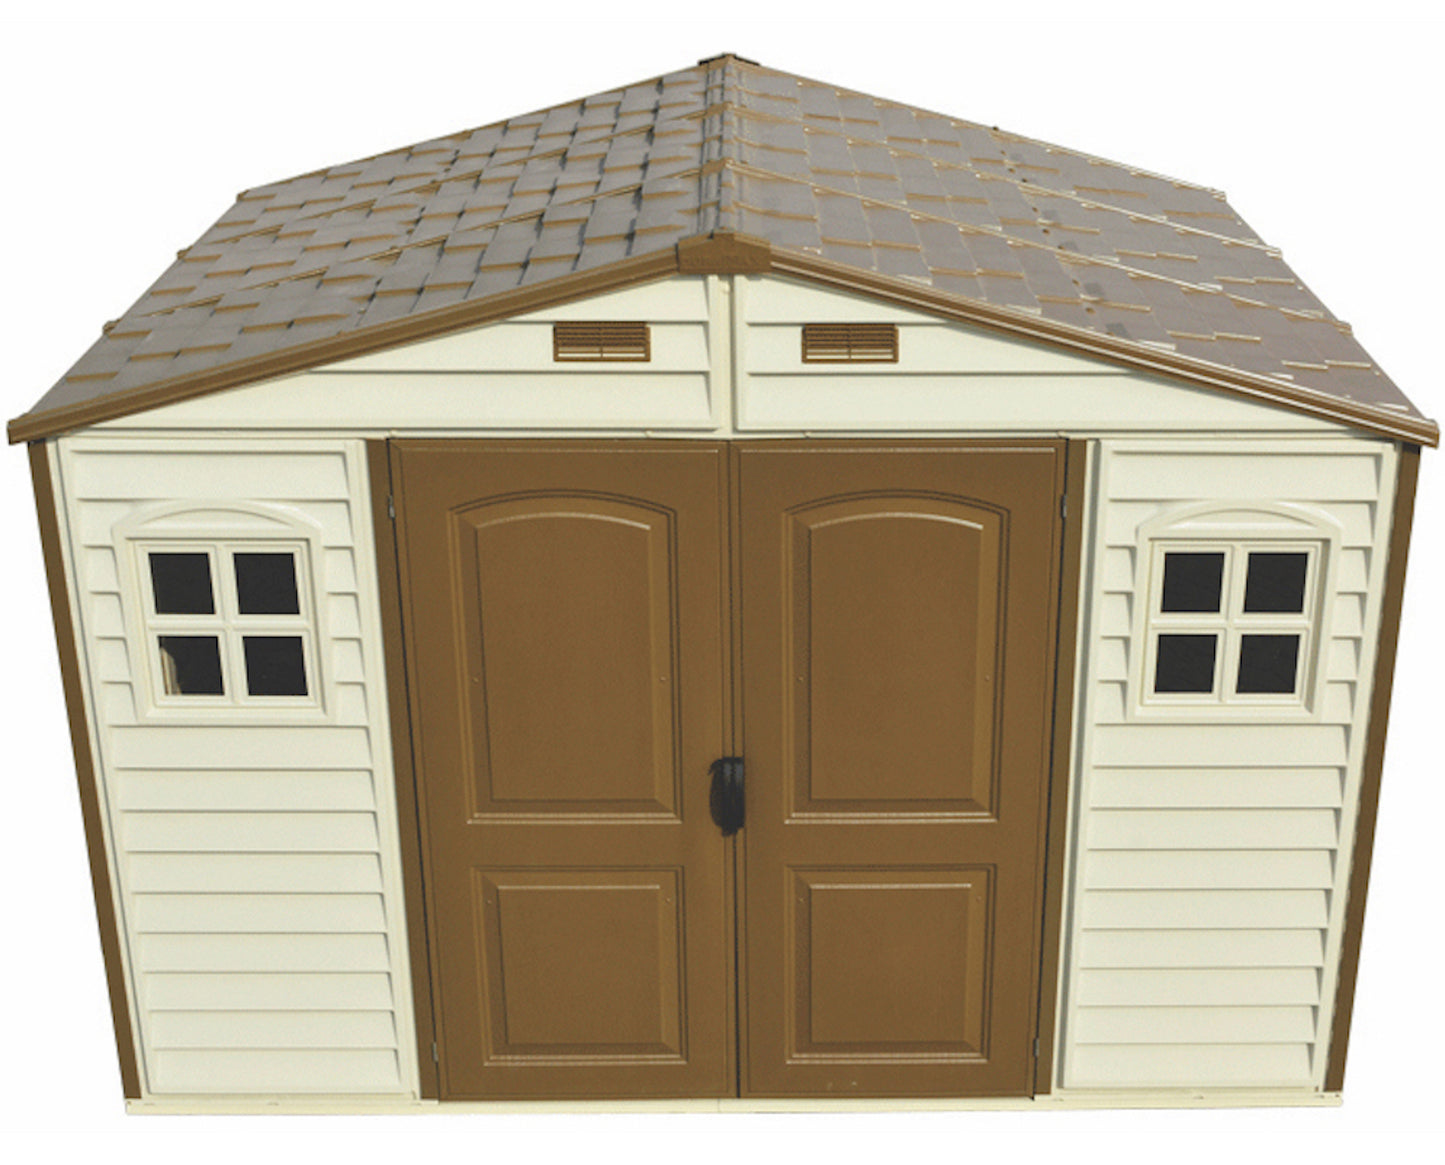 Duramax Woodside, 3.19 x 2.40 m, double doors for easy access of storage and ventilation for a better air flow.